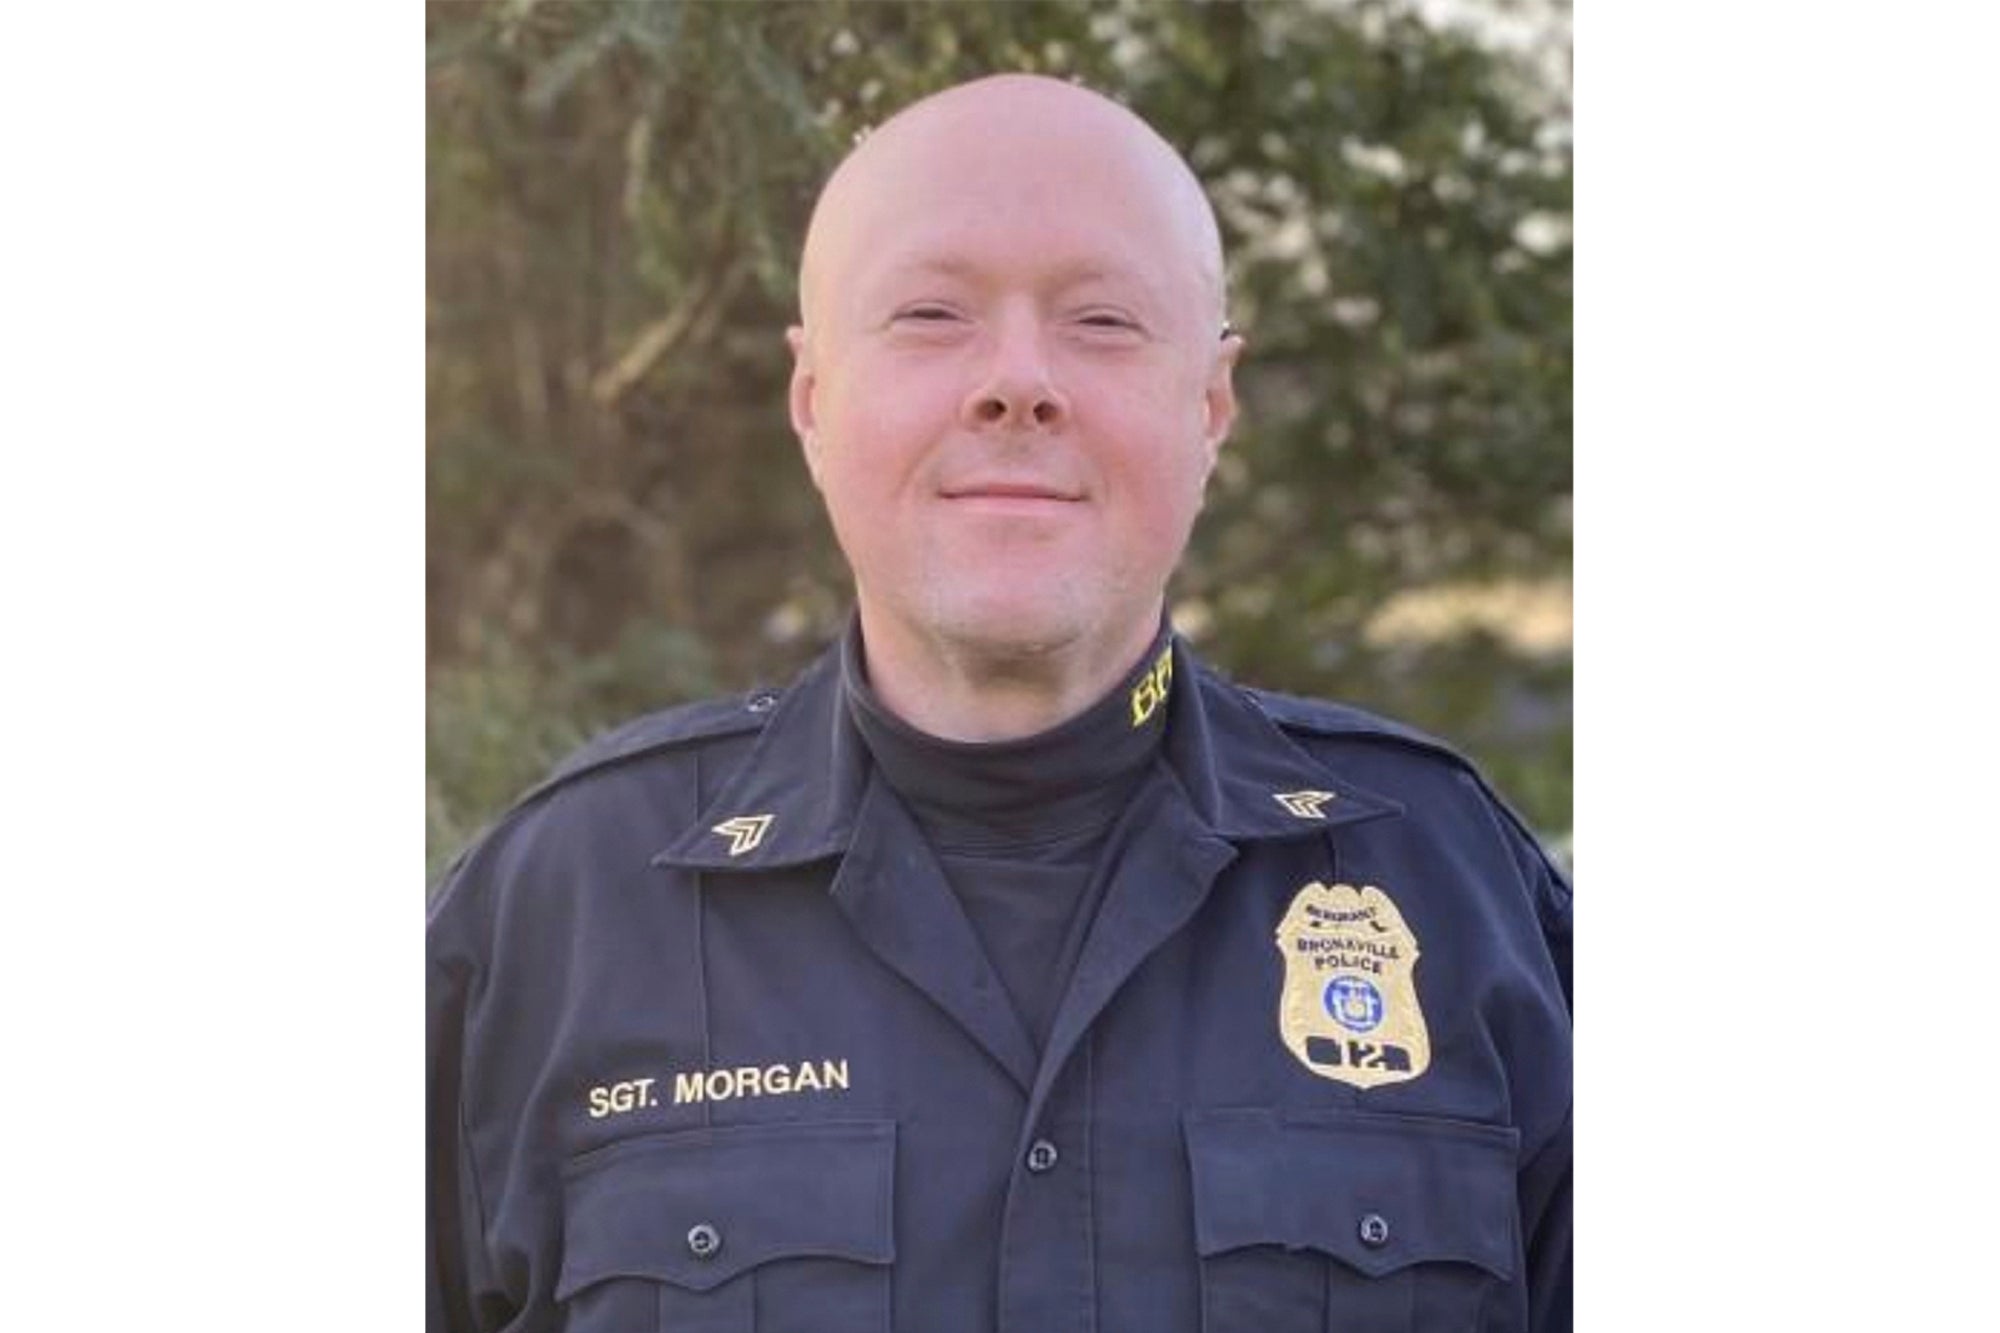 Bronxville Police Department Sergeant Watson Morgan, his wife Ornella Morgan and their two children, aged 10 and 12, were found dead in an apparent murder-suicide